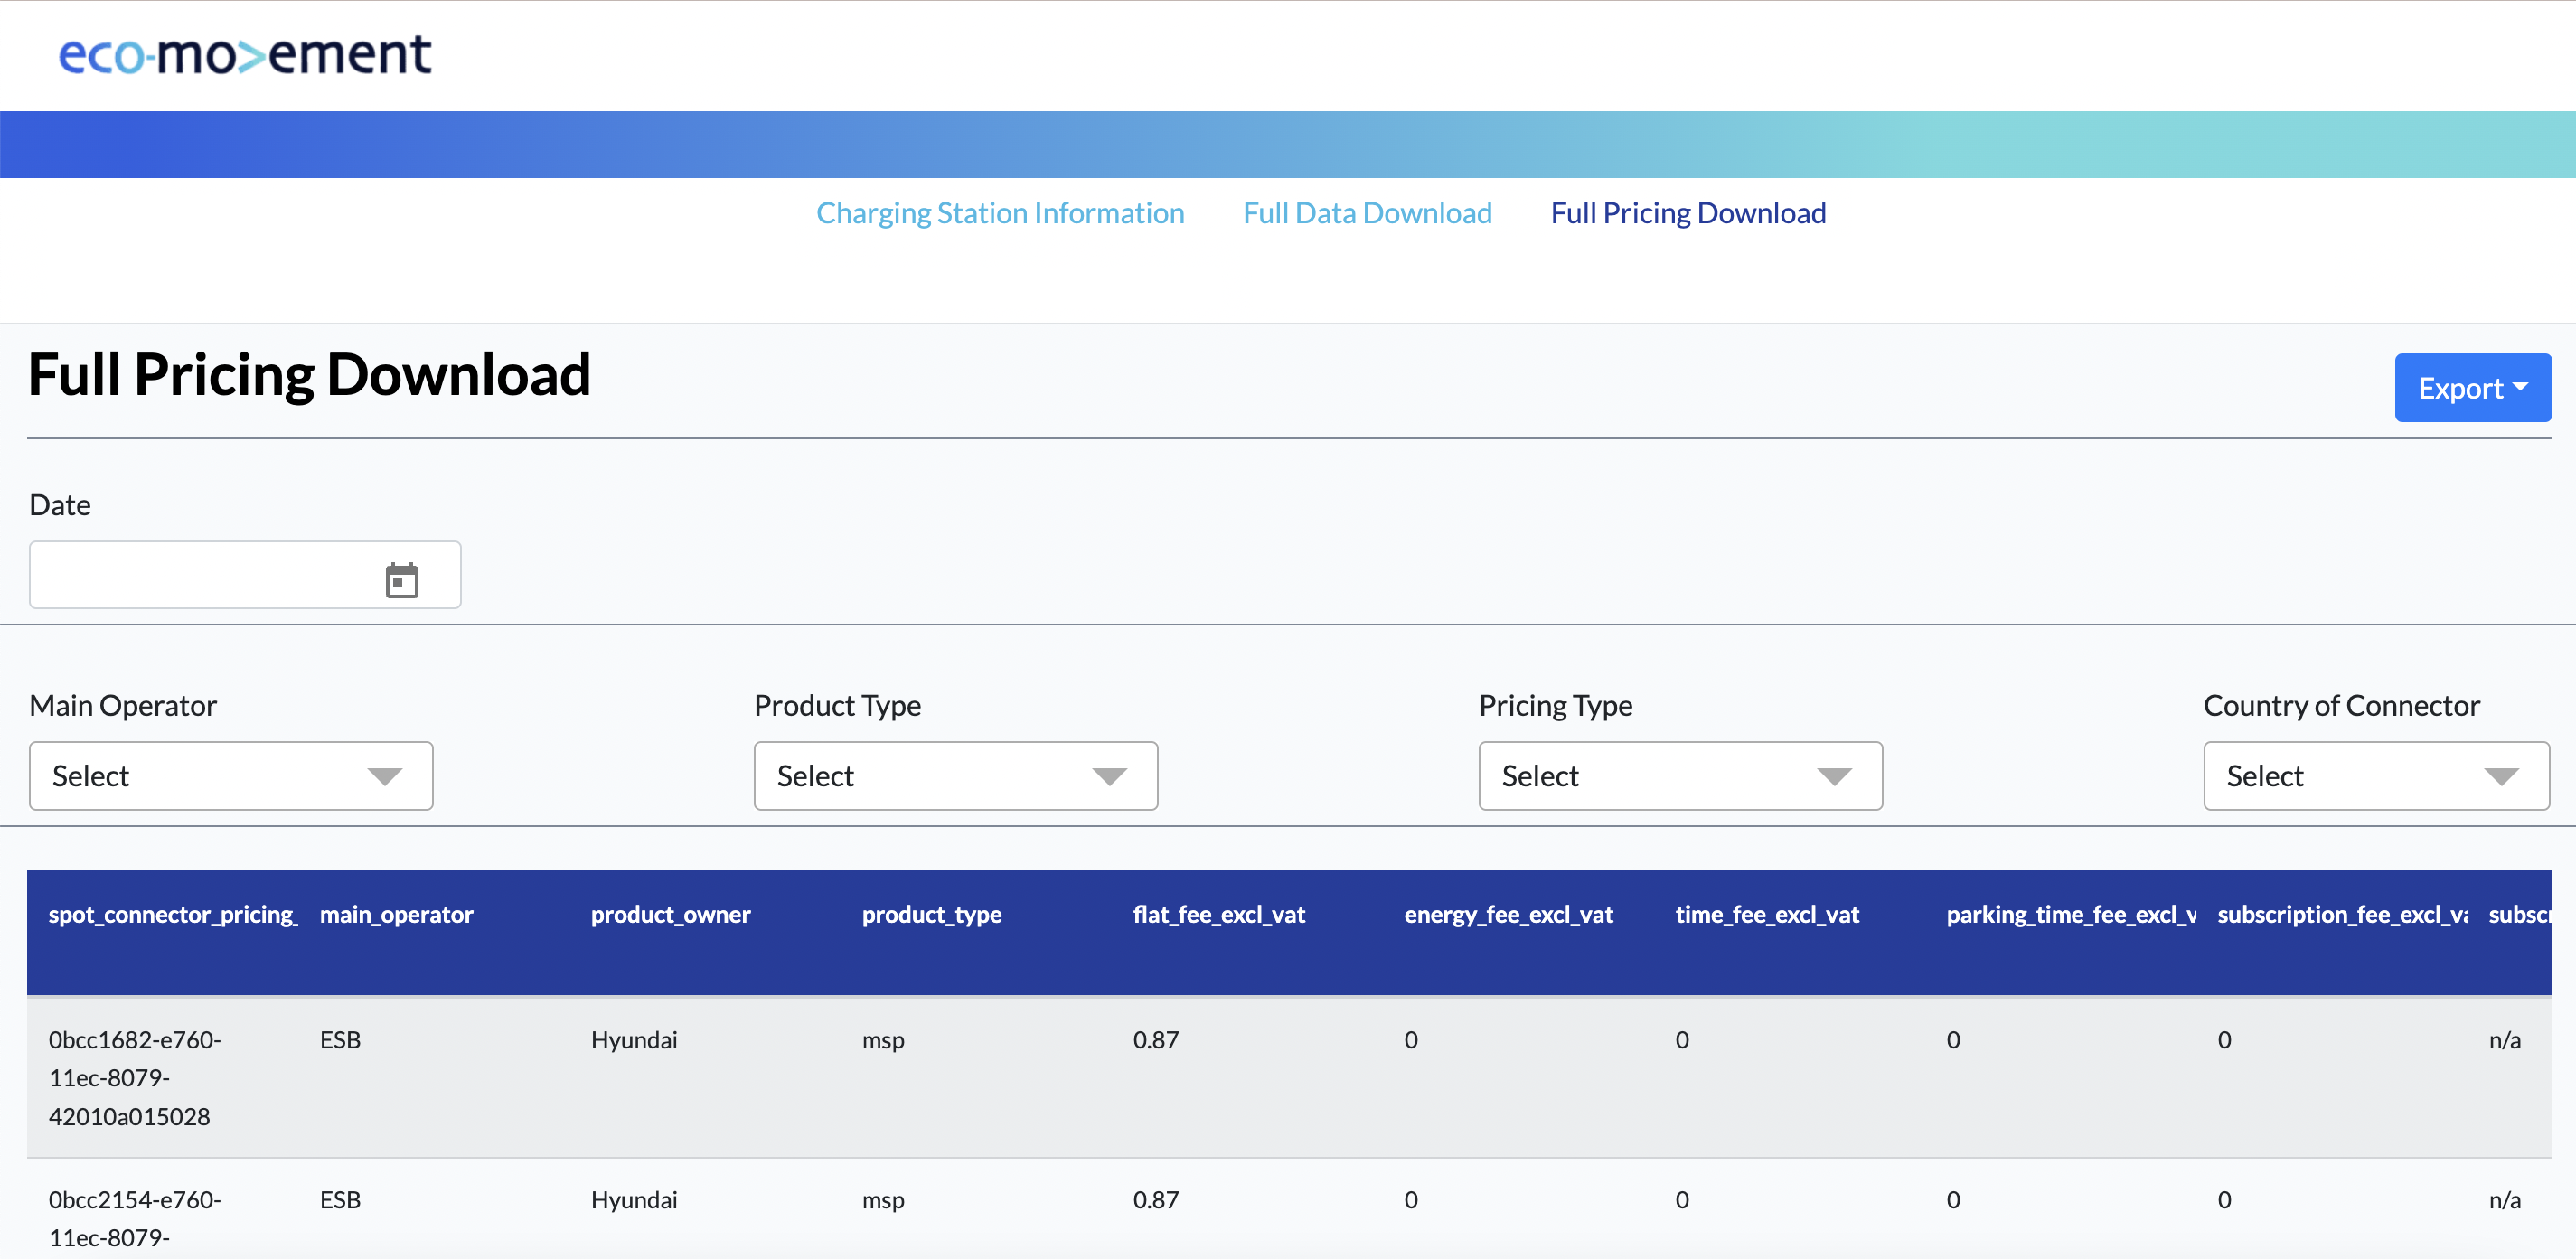 The Full Pricing Download dashboard